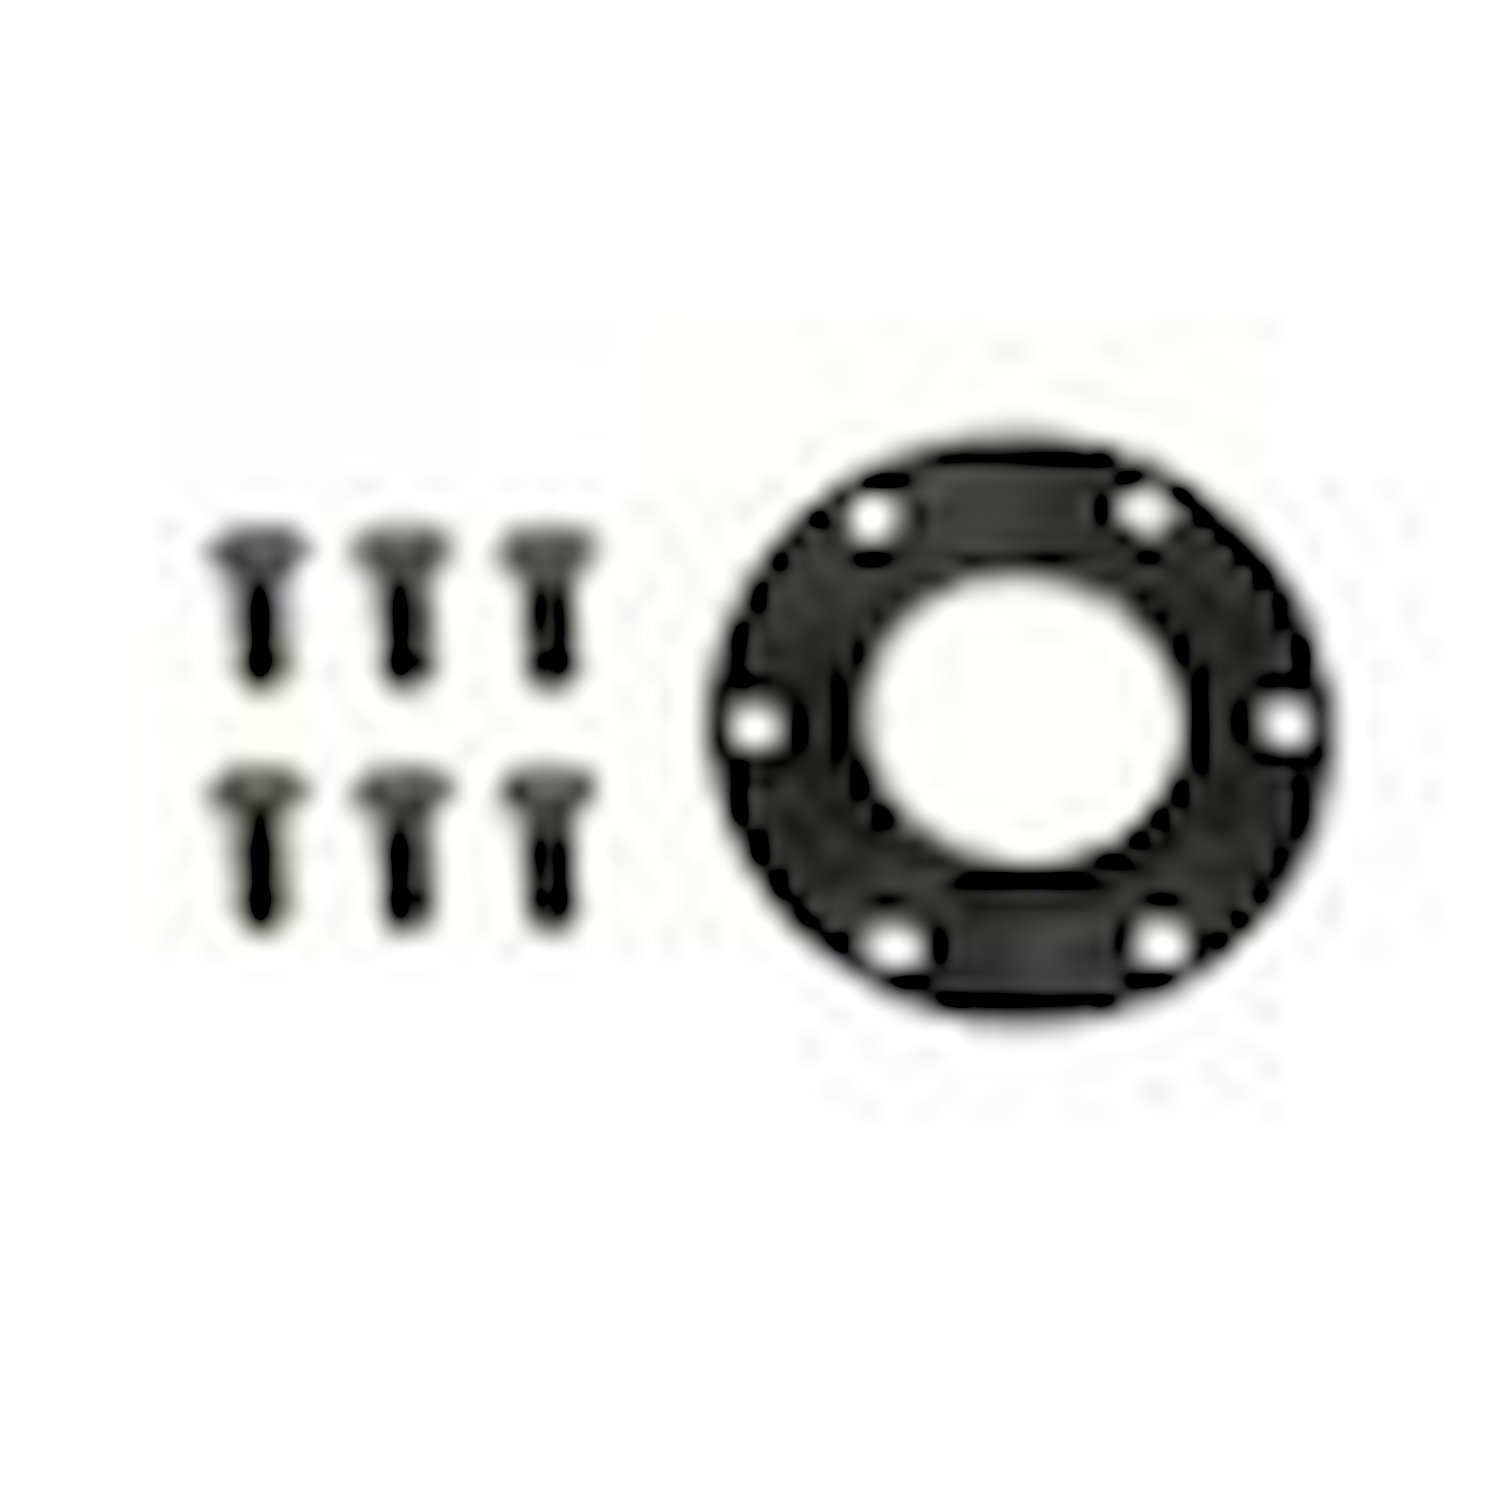 915605 Crank Adapters, Ford - 289/302/351C/W To GM ATI Bell Housing & Flexplate